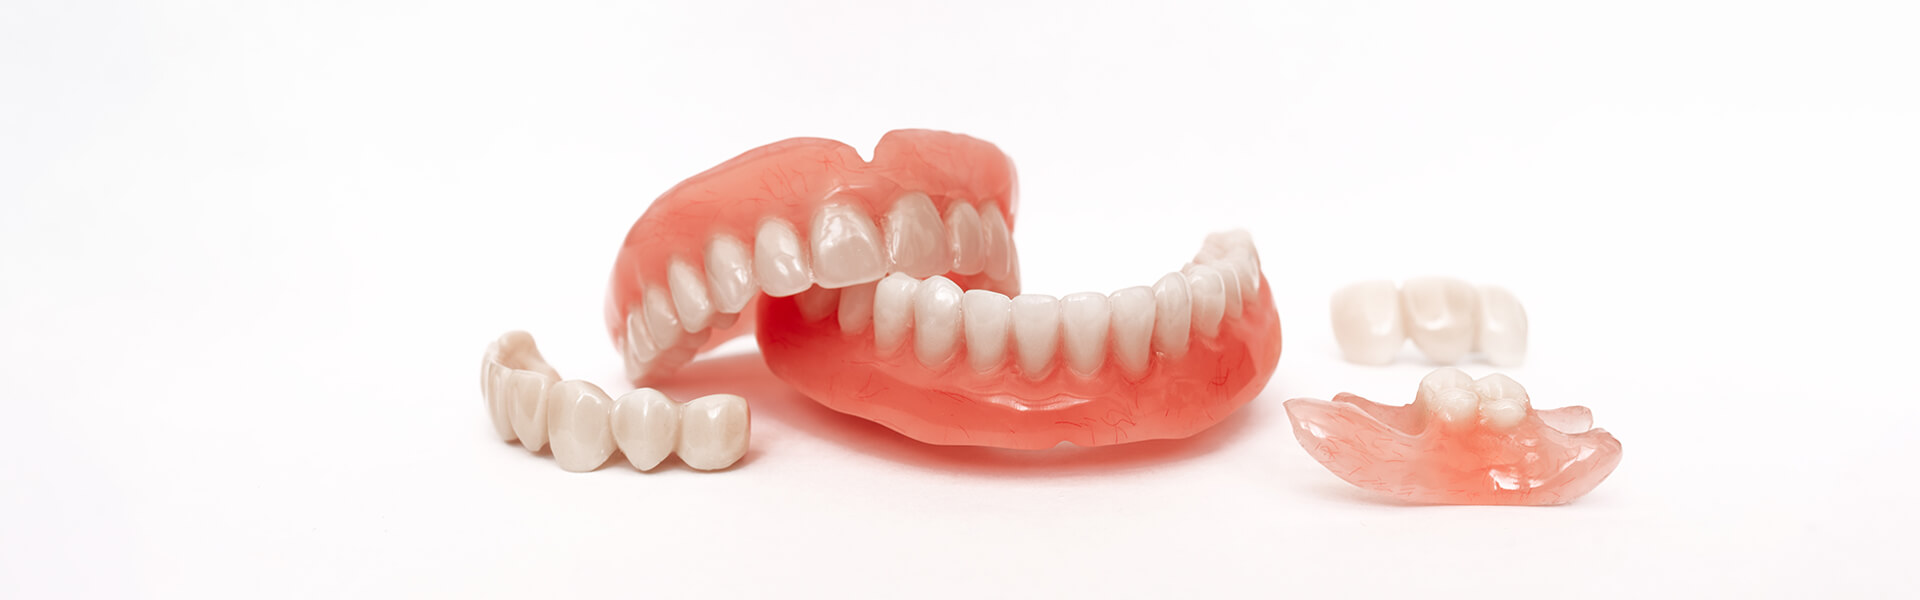 How to Get Permanent Dentures in Six Steps